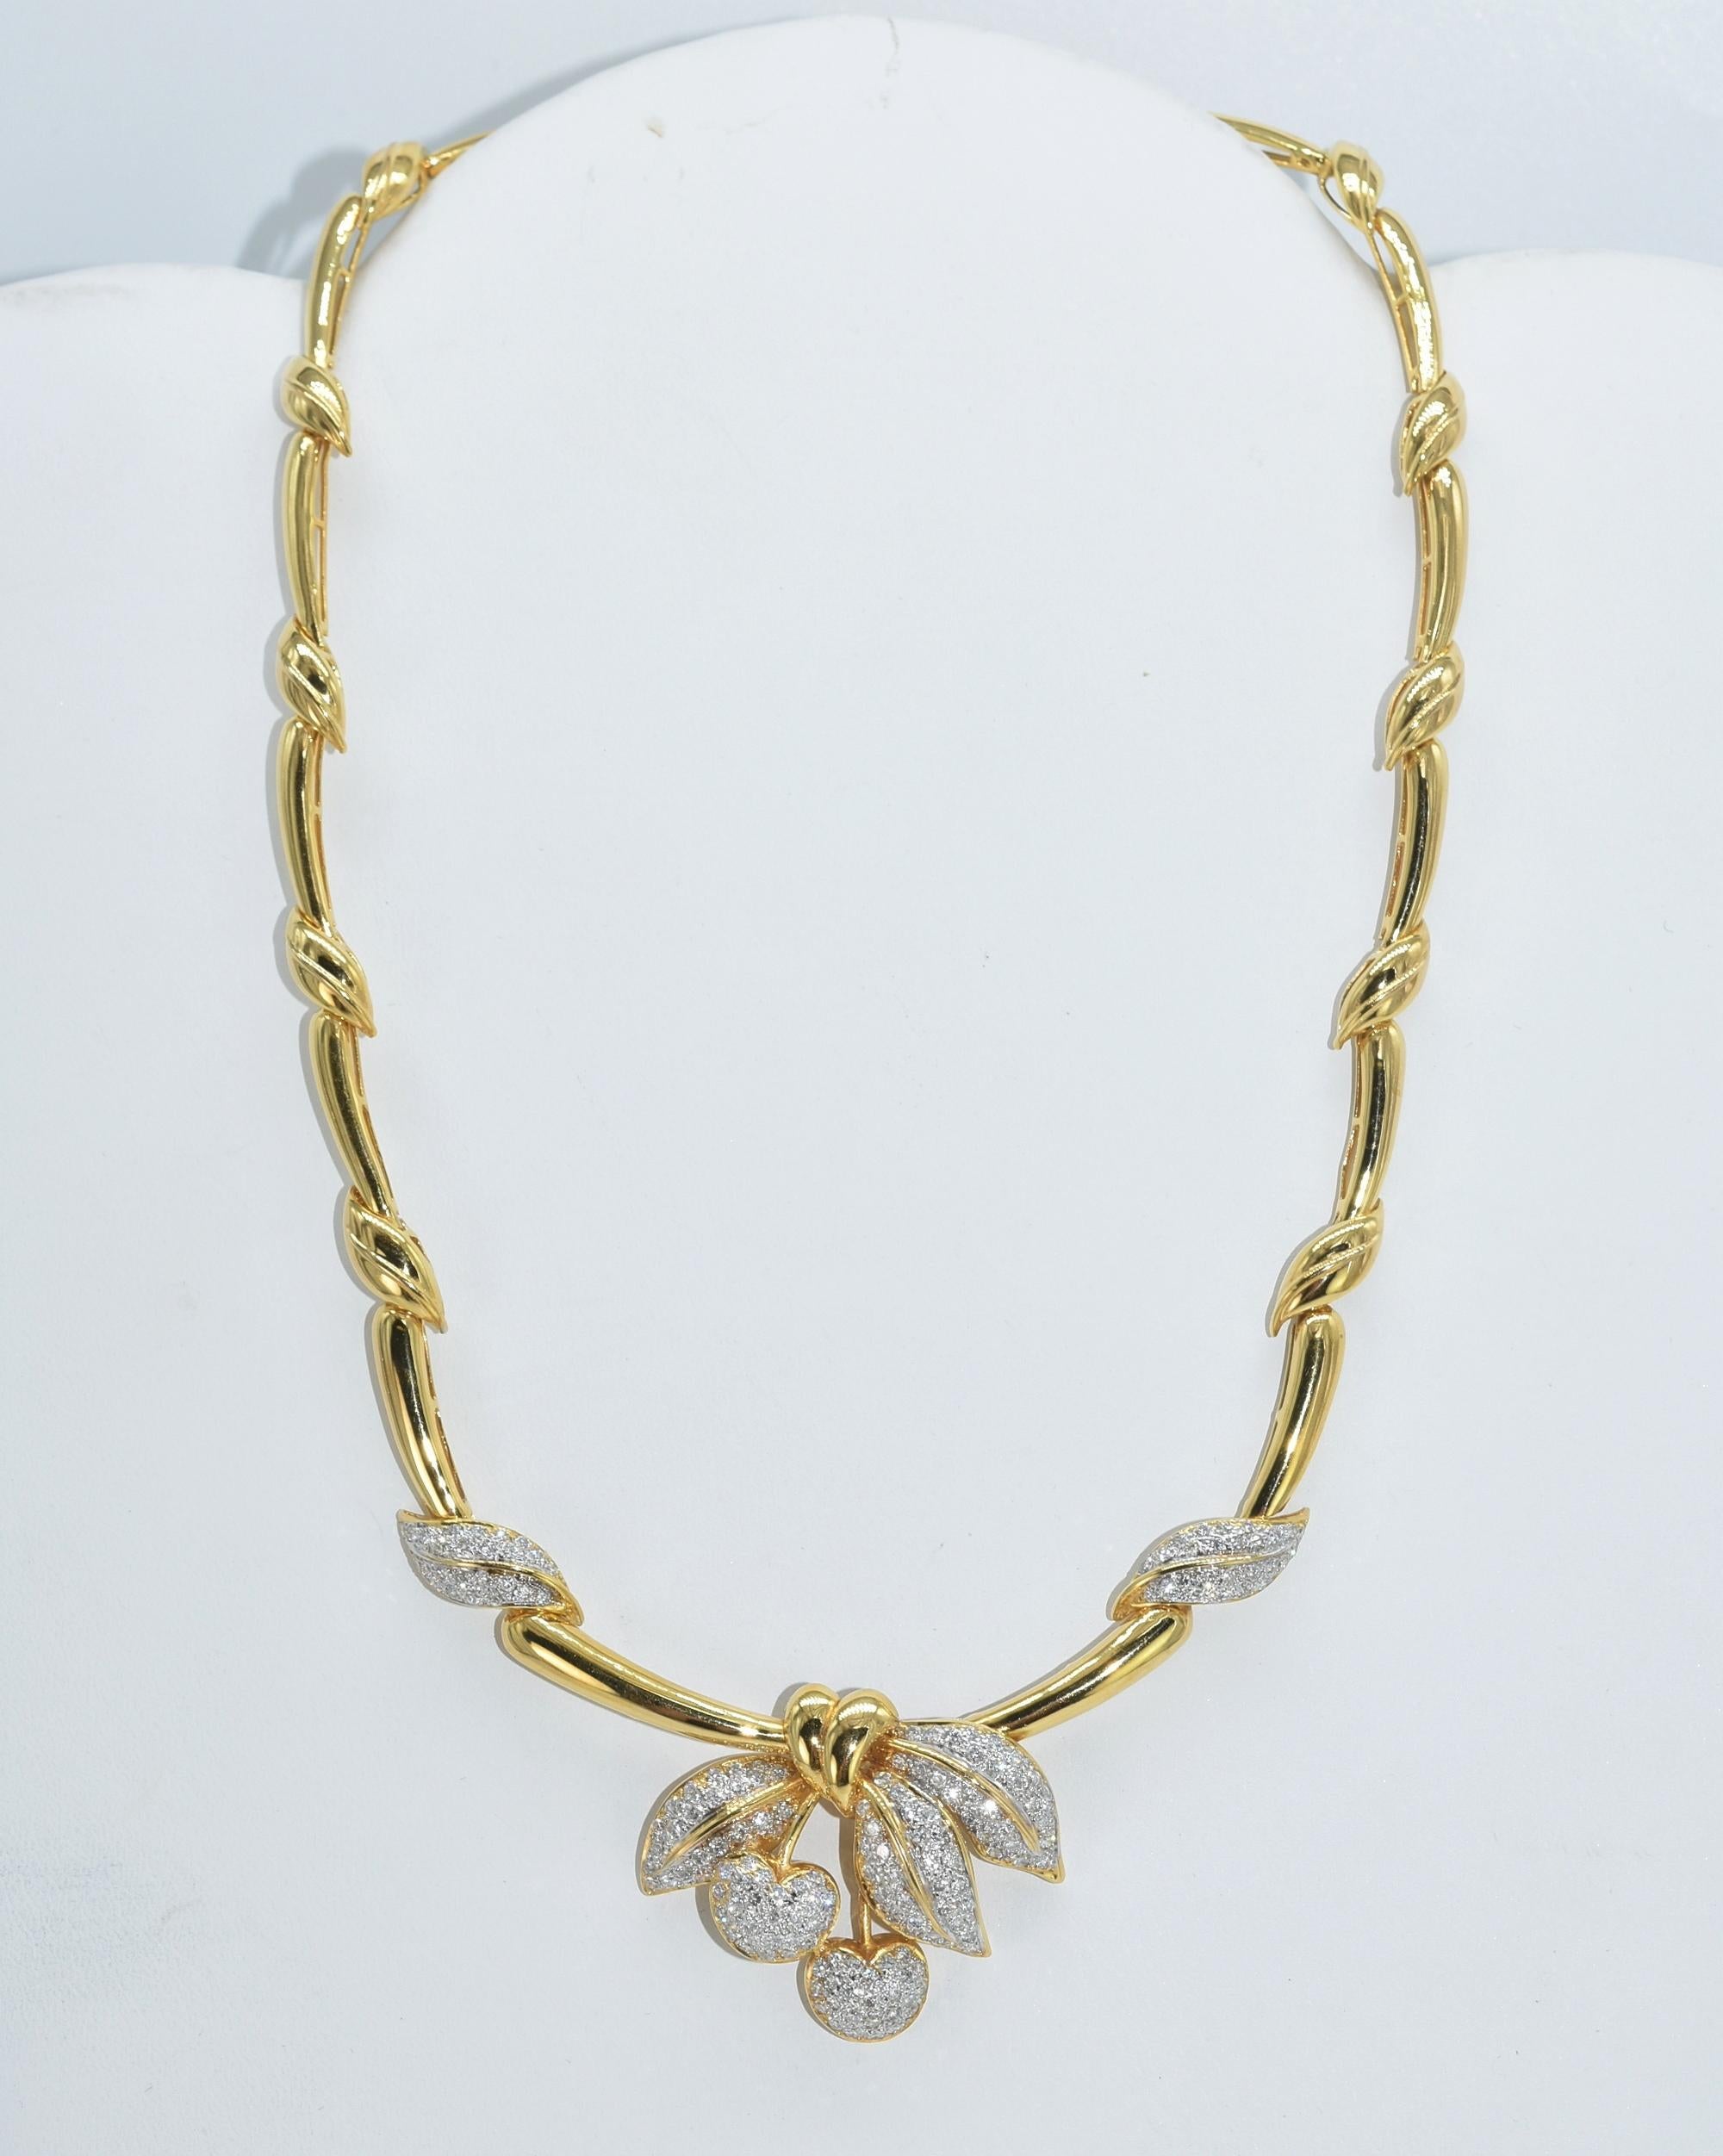 18K gold and diamond cherry cluster necklace. 18K yellow gold and 2.0 cttw diamonds, G-color, Vs-2, Si-1 clarity, in a Cherry Cluster with leaves as links, Stamped on back on cherries 